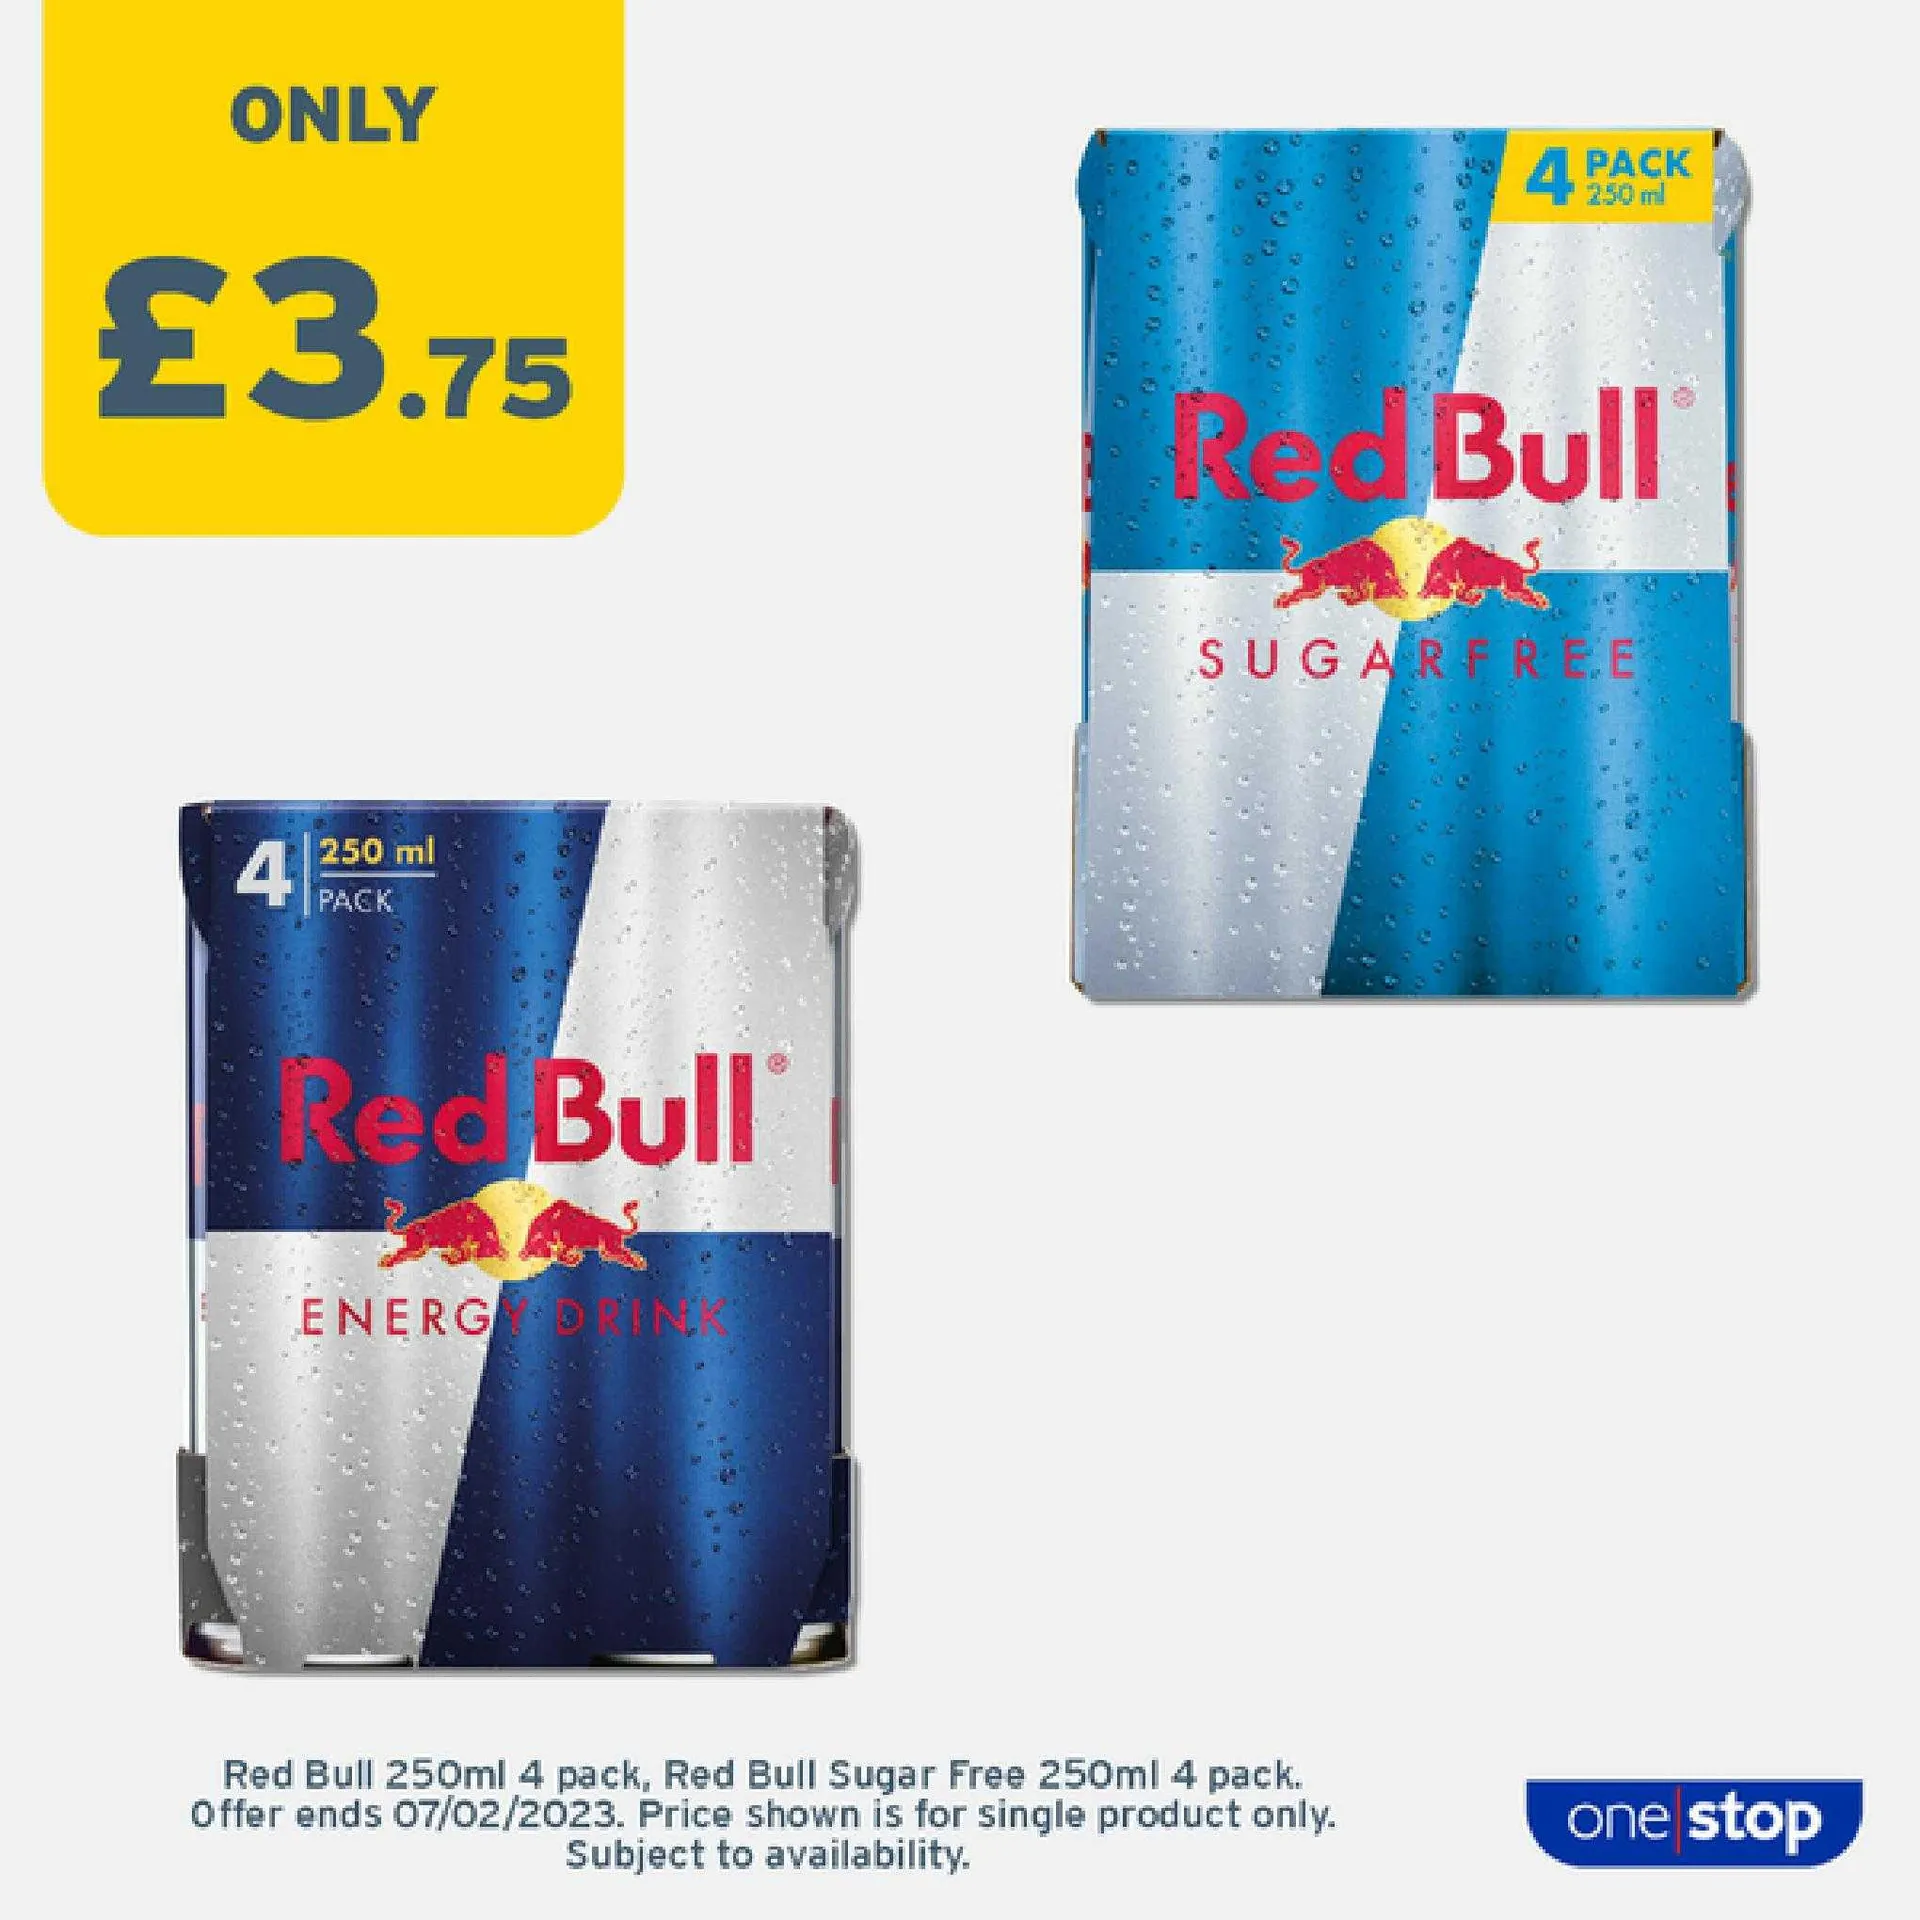 One Stop Weekly Offers - 3